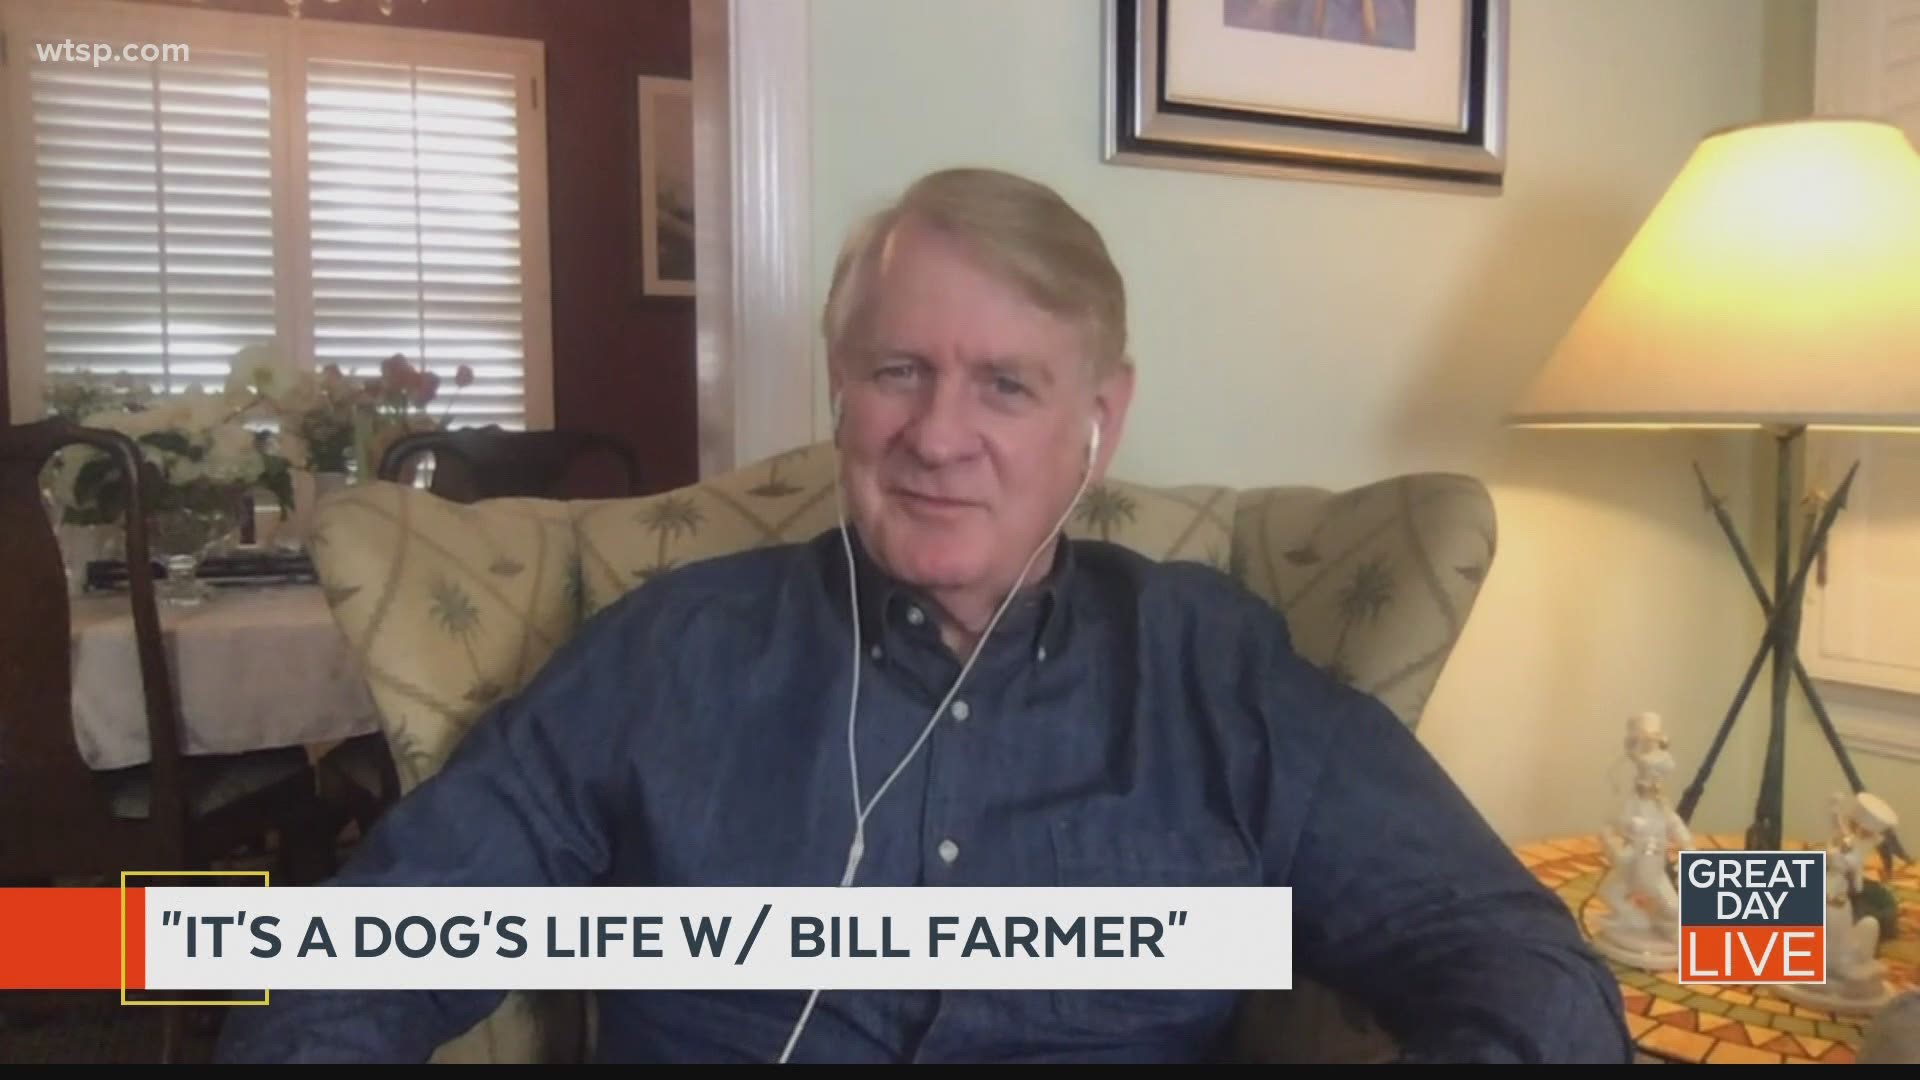 You can stream “It’s a Dogs Life” with Bill Farmer on Disney+ starting May 15.